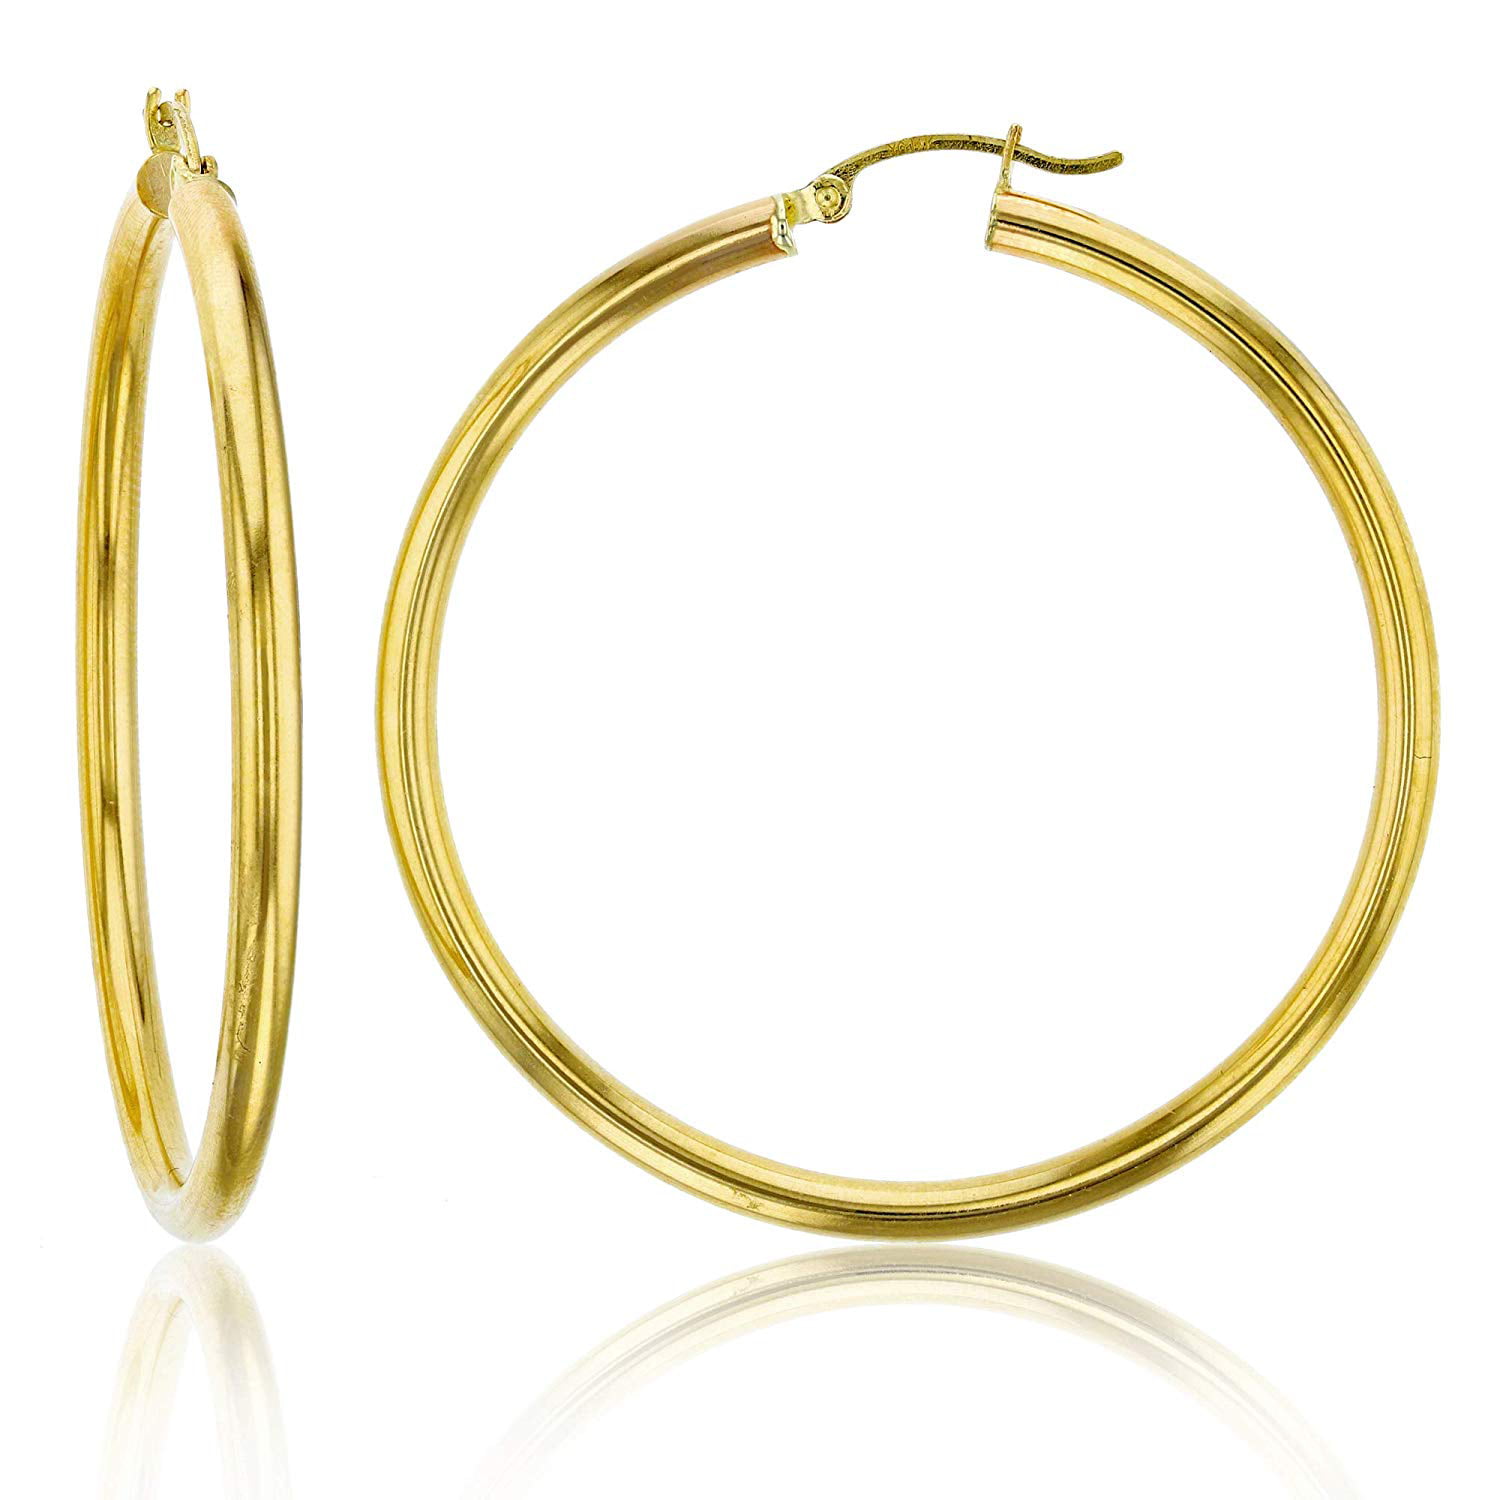 Size 13mm Gift Women 14K Gold Hoops 14K Solid Yellow Gold Hoop Earrings 1.50mm Thick Classic Hoop Earrings Jewellery Earrings Hoop Earrings 